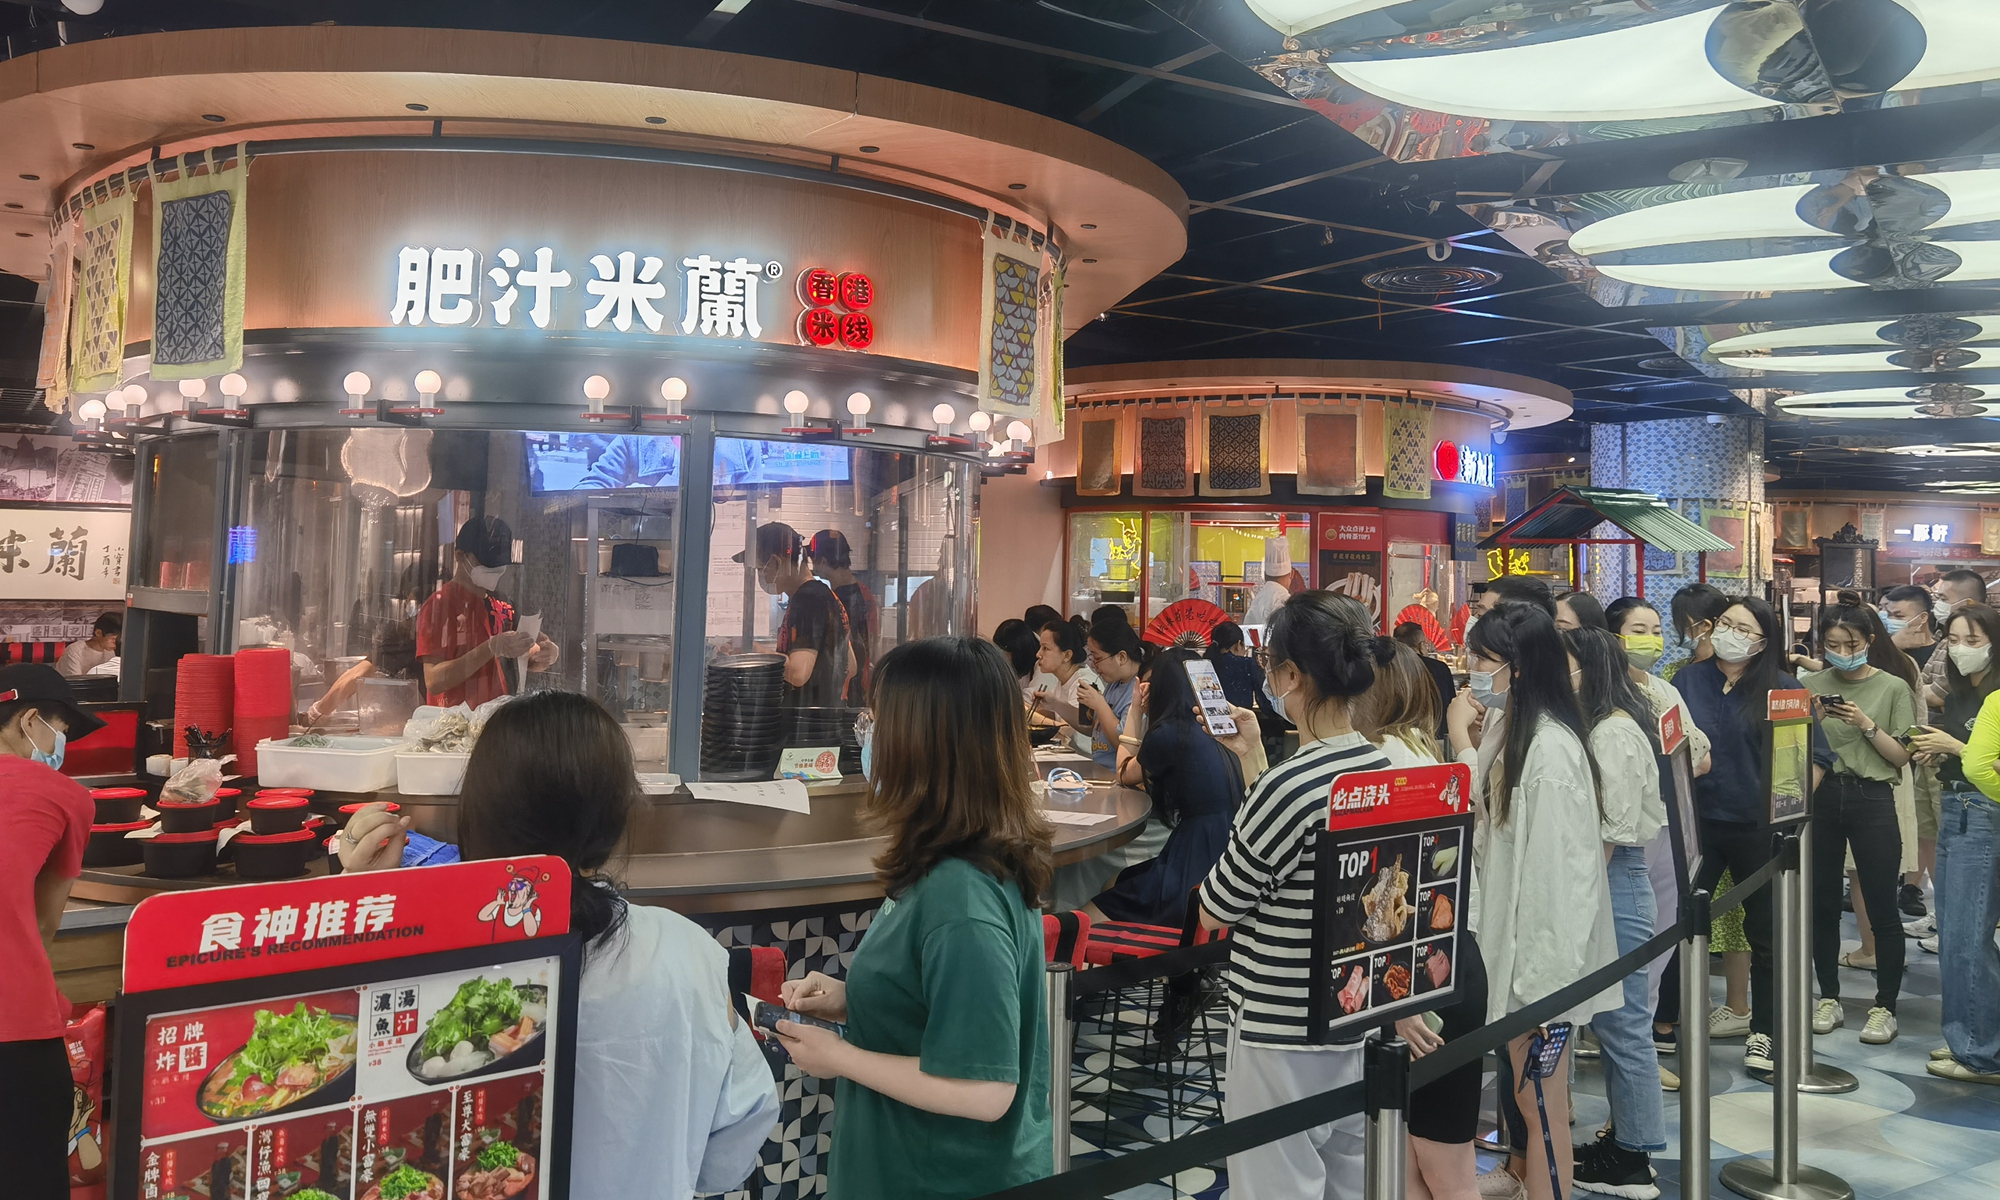 The resumption of dine-in services starts in an orderly manner in Shanghai on June 29, 2022 after it was suspended for about three months. Shanghai residents flock back to restaurants to enjoy delicacies. Photo: Bai Qi/Global Times